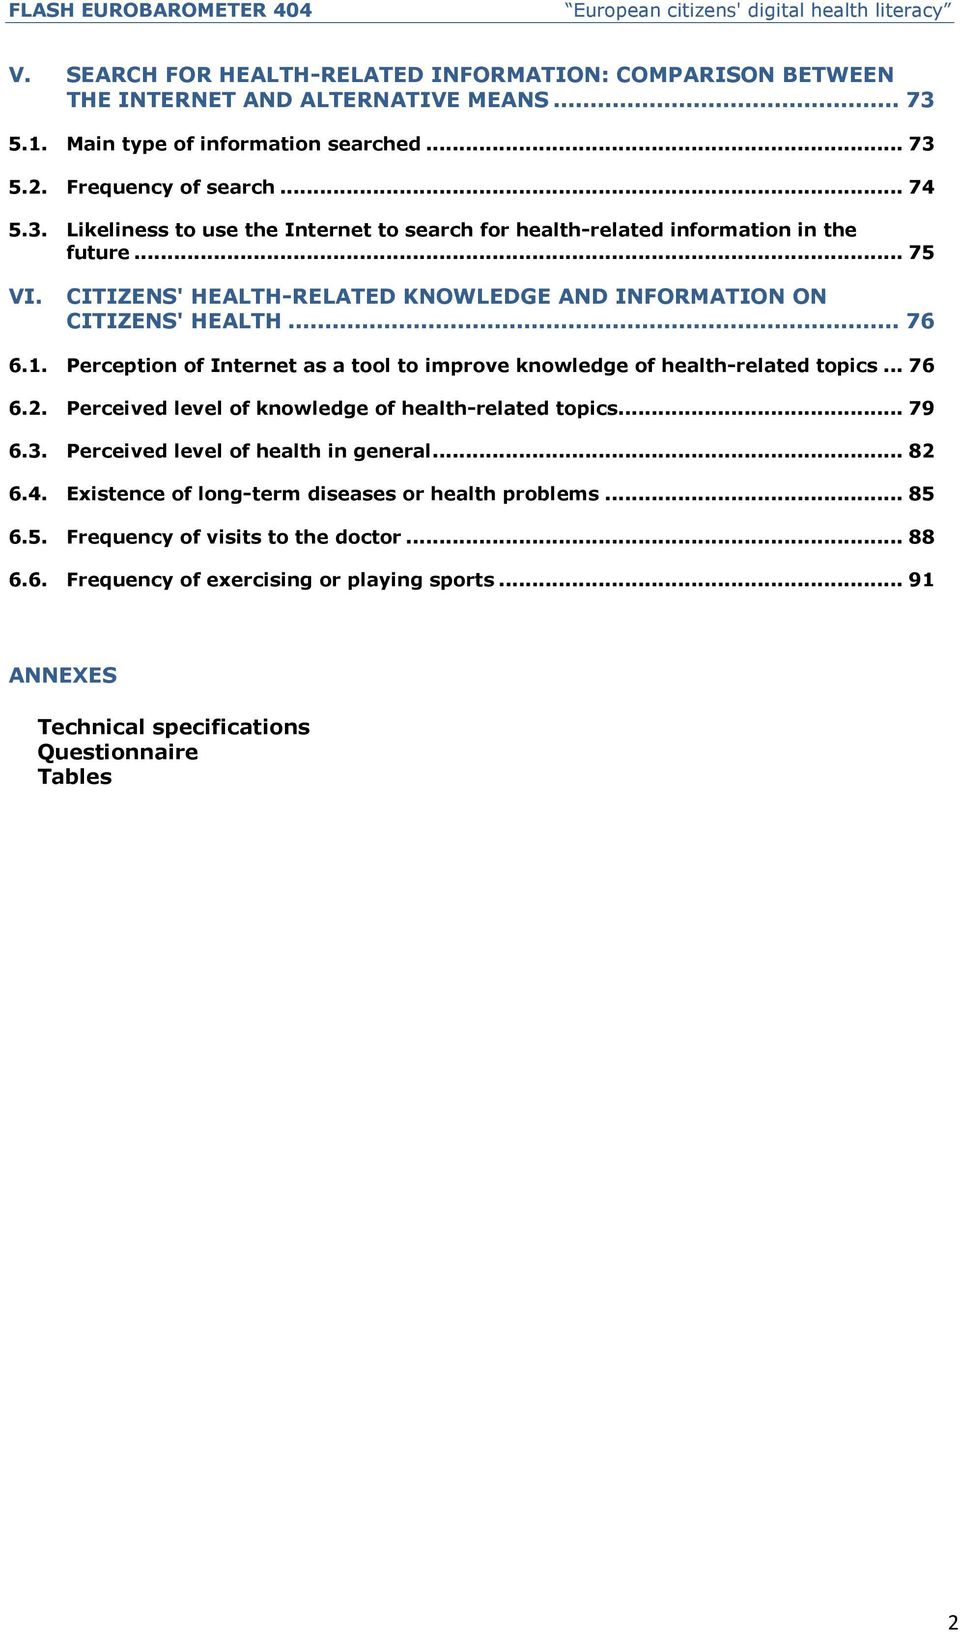 Perception of Internet as a tool to improve knowledge of health-related topics... 76 6.2. Perceived level of knowledge of health-related topics... 79 6.3. Perceived level of health in general... 82 6.